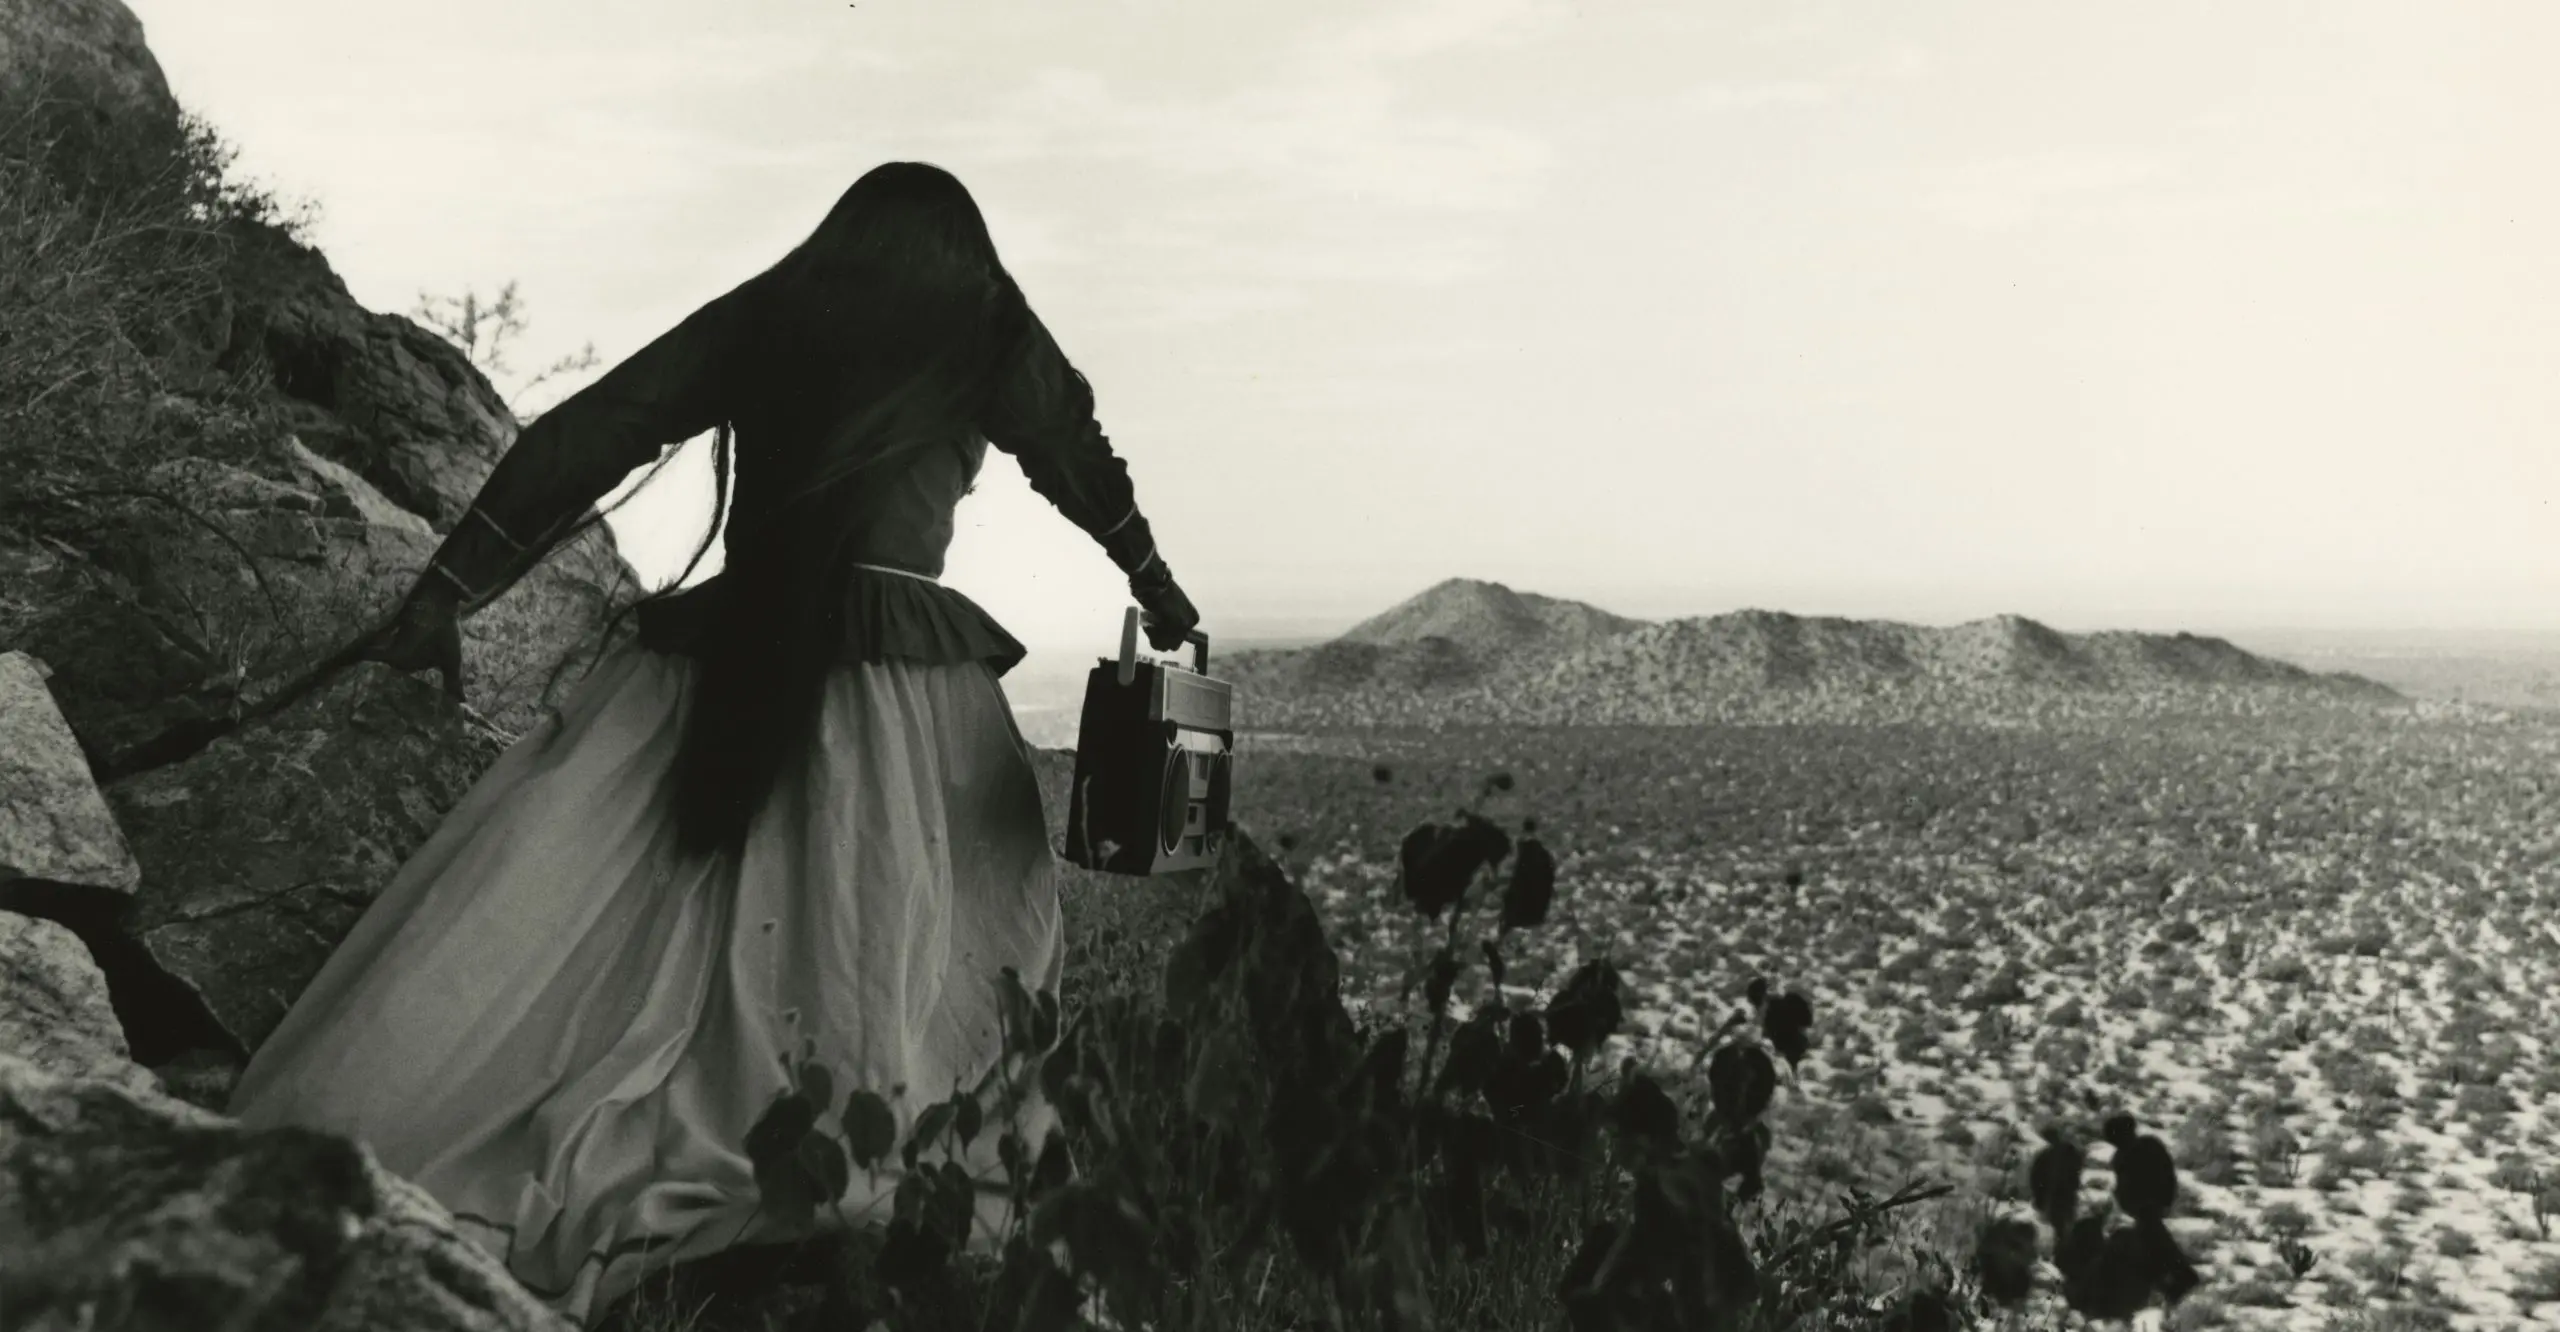 Black and white image of a woman walking in the desert, her back is to the camera as she walks away